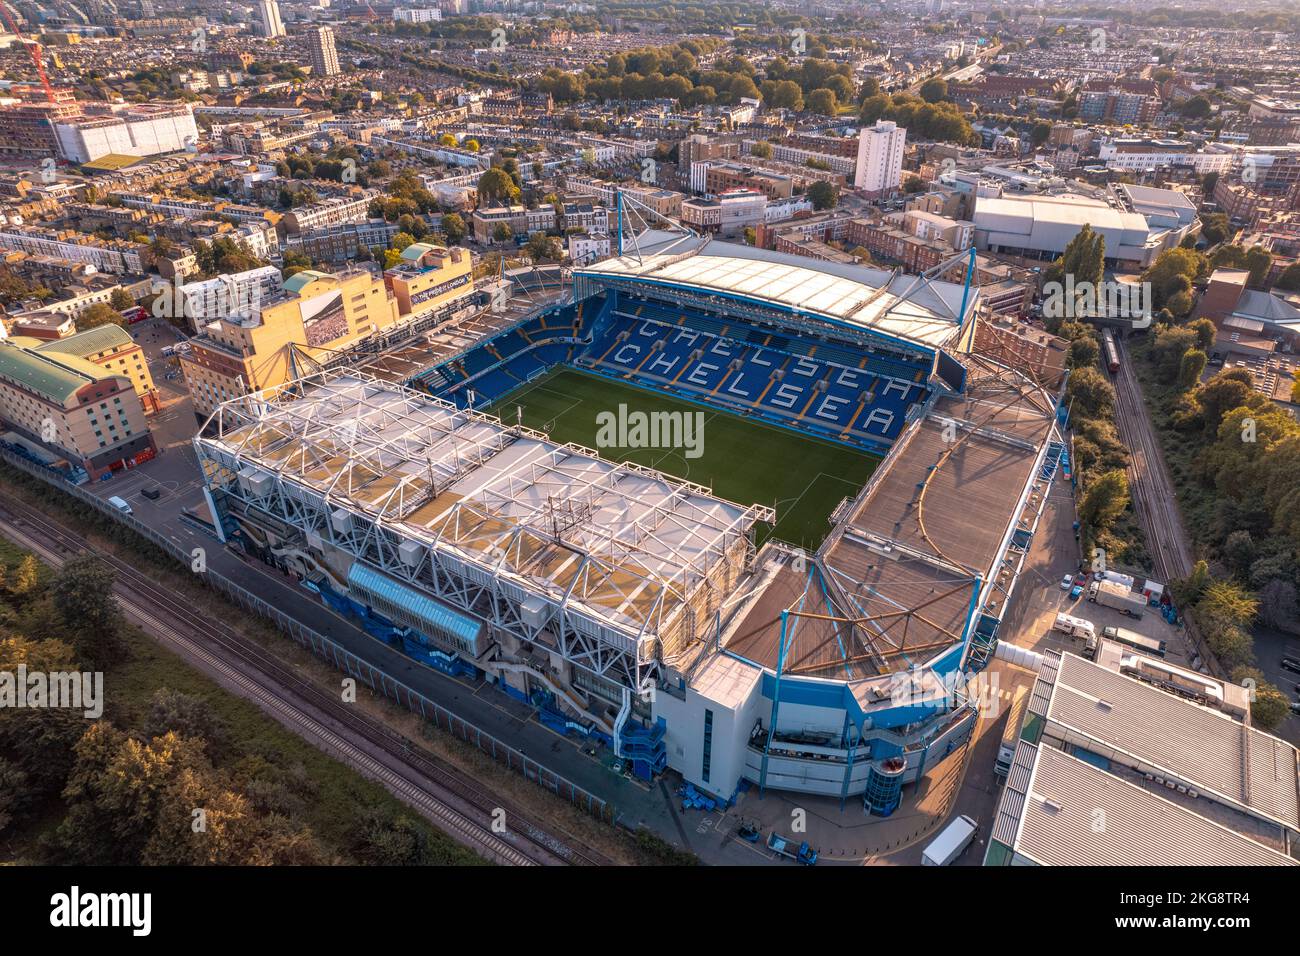 Aerial view of Chelsea Football Club in London, also known as